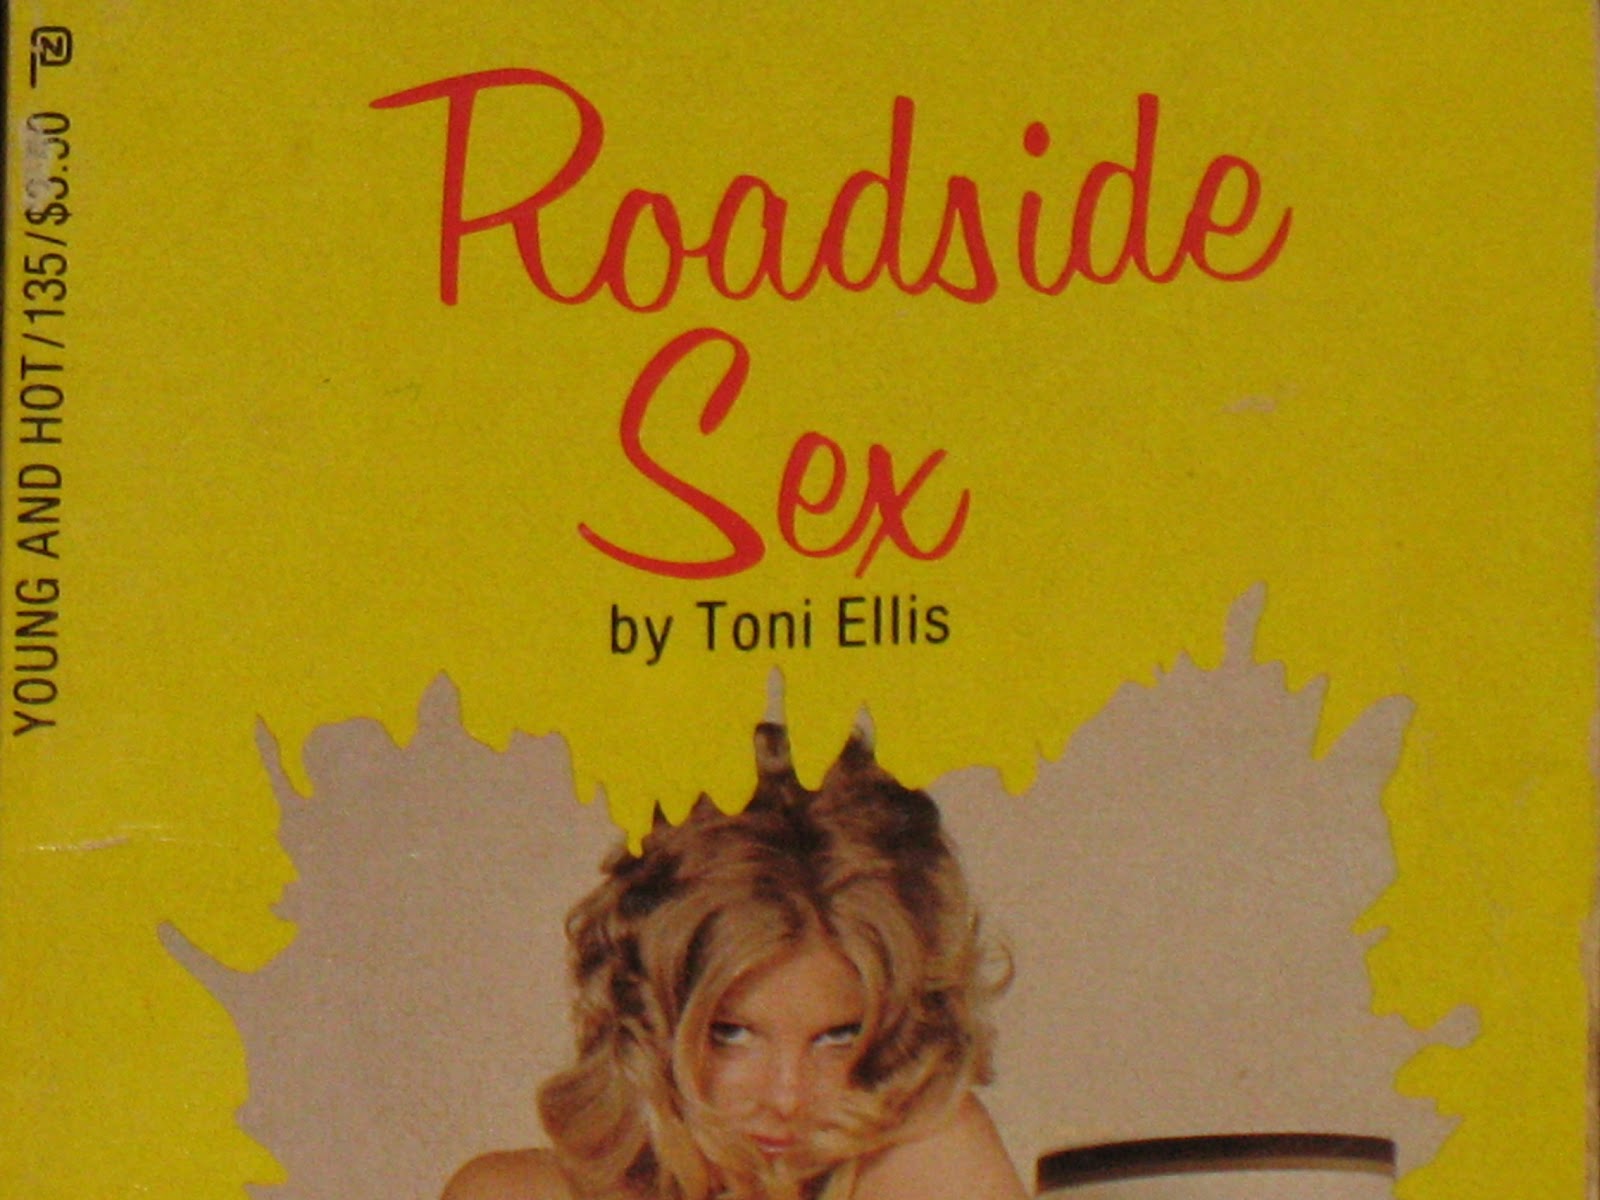 Mostly Shakespeare Roadside Sex 1982 Book Review